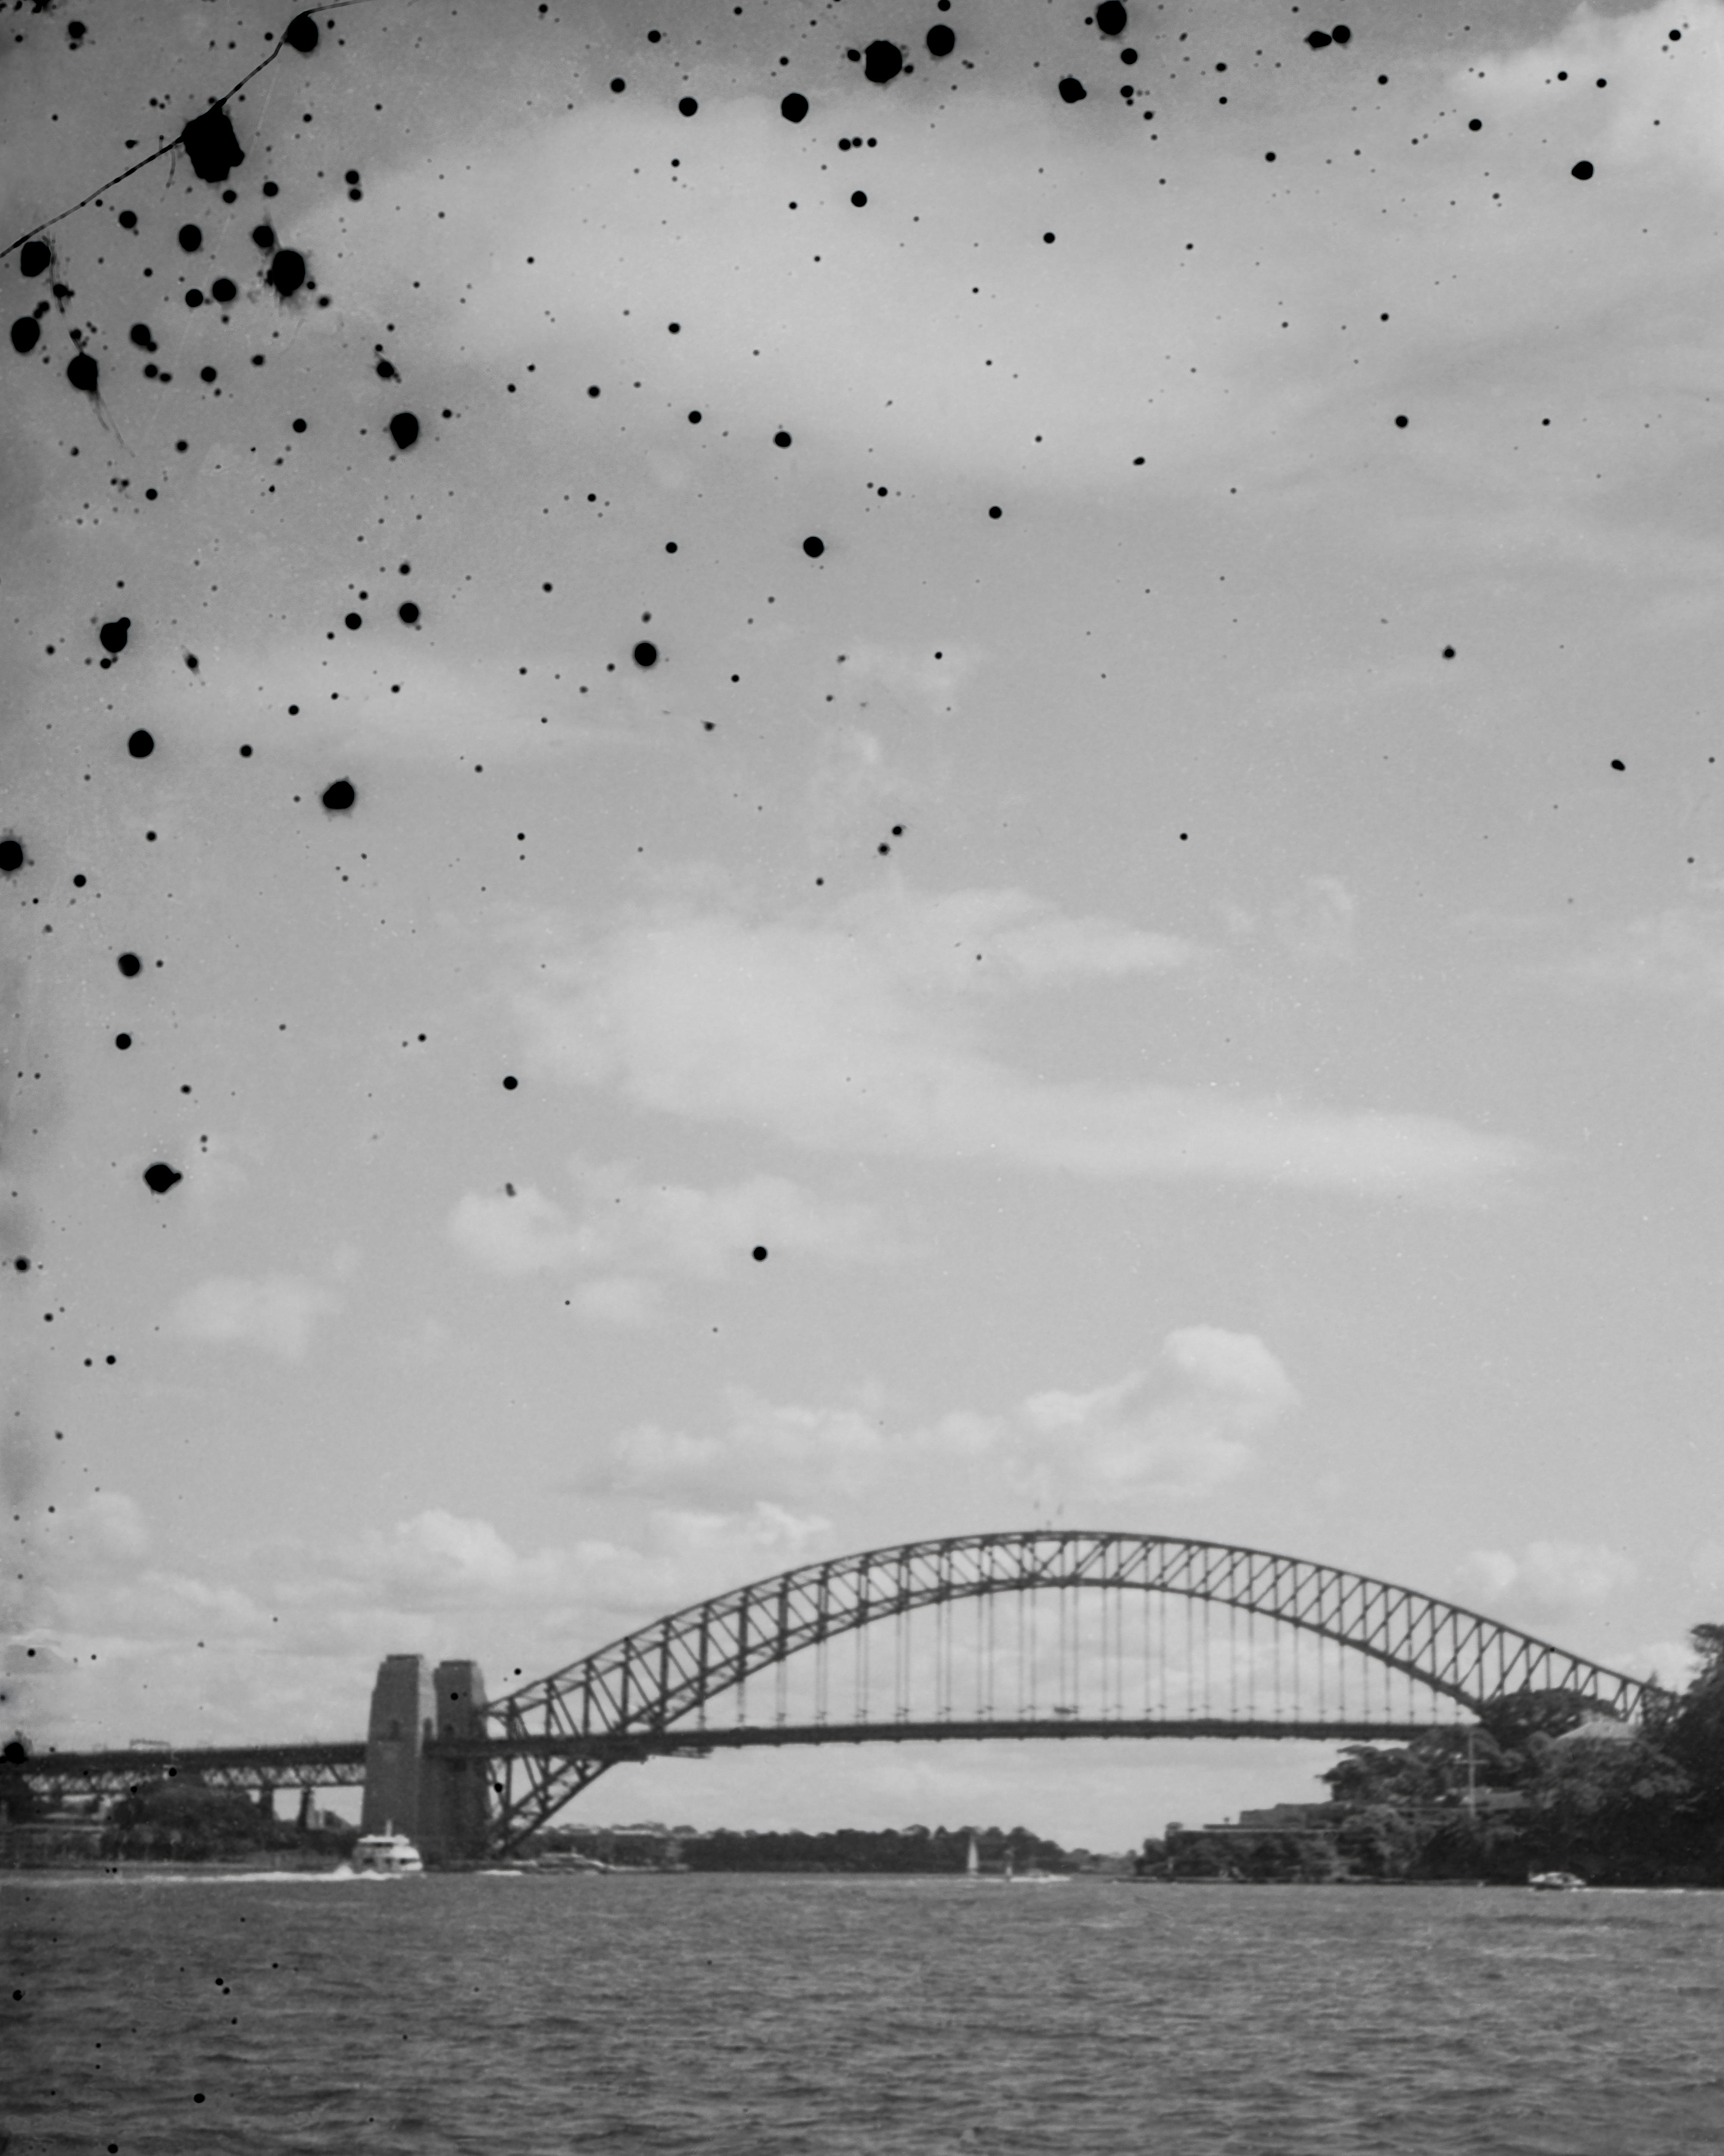 Artwork by Sammy Hawker, of a film photo of the Sydney Harbour bridge with dots of erosion marks on the image